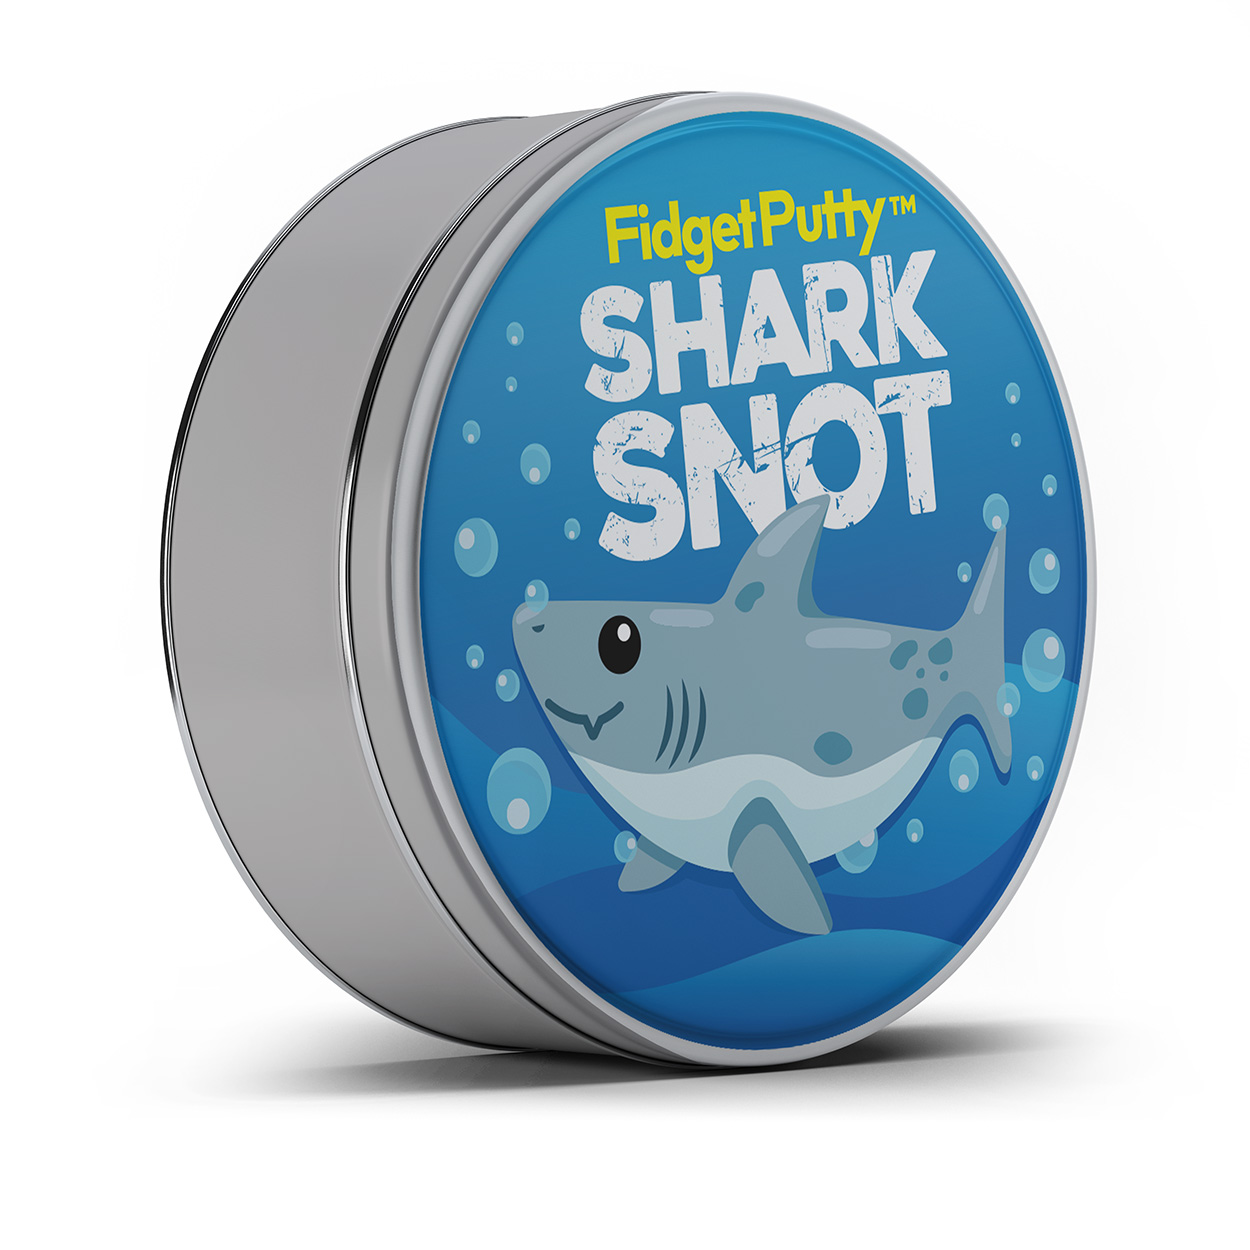 Shark Snot Fidget Putty $8.95 : FunSlurp.com, Unique Gifts and Fun Products by FunSlurp